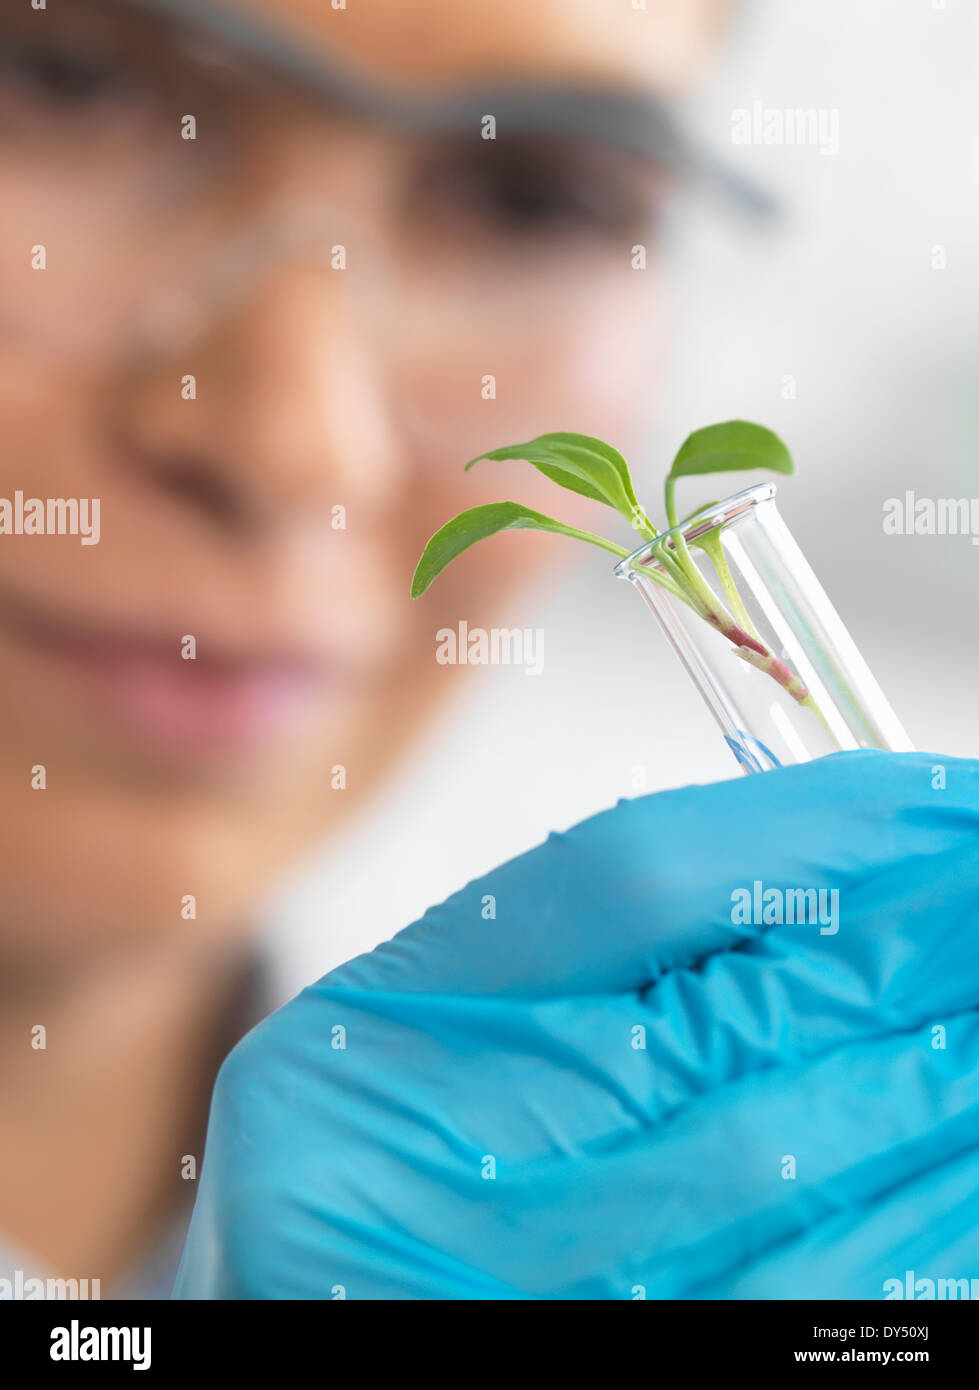 Scientist viewing seedling in test tubes under trial in lab Stock Photo